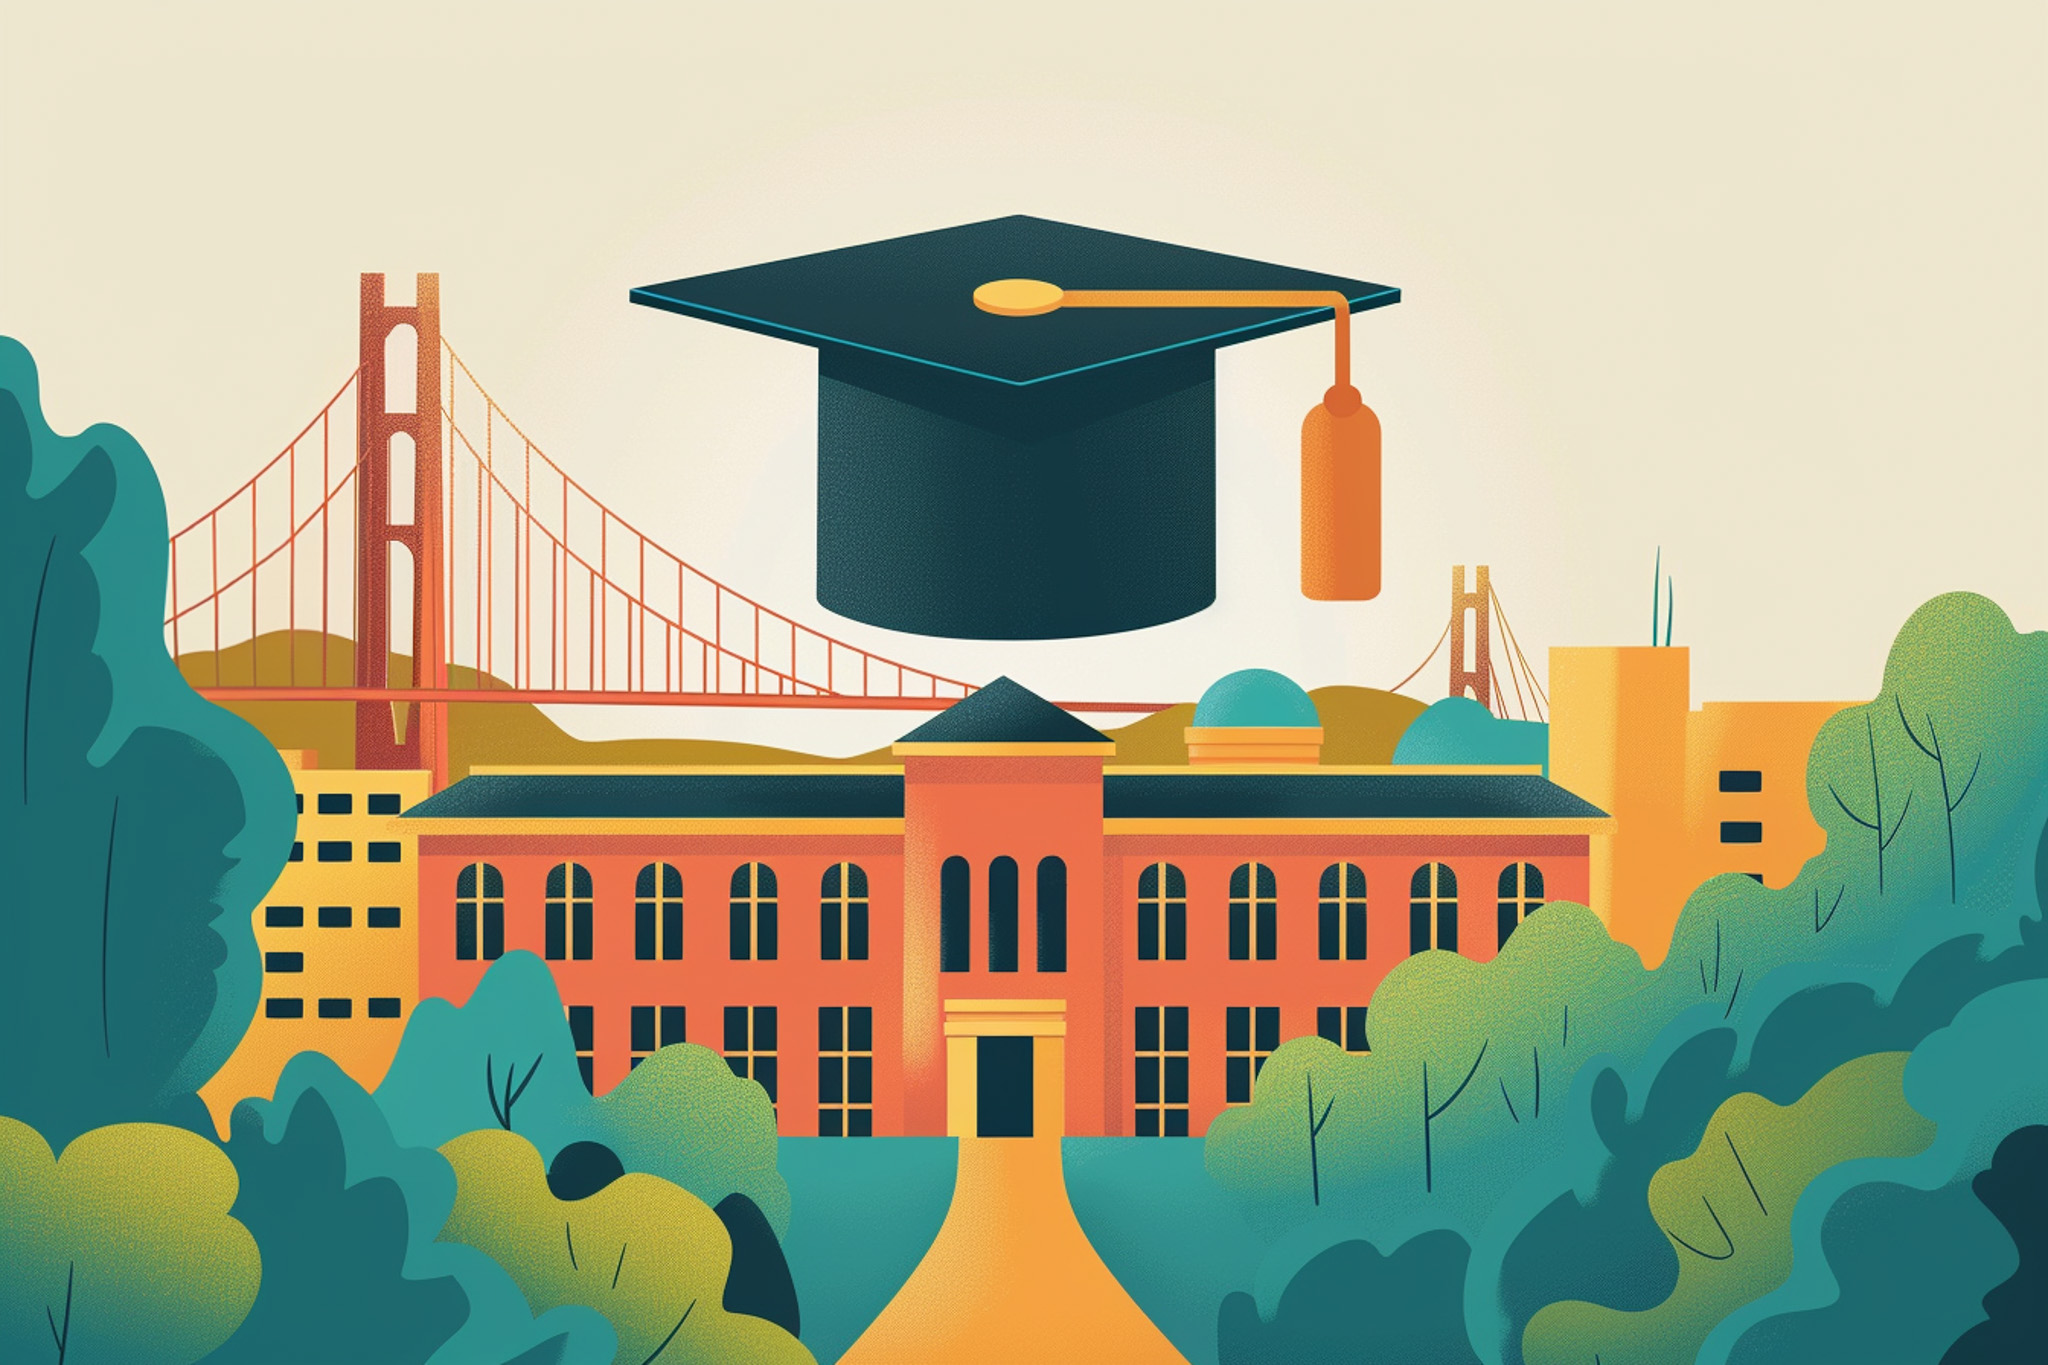 An illustrated graduation cap hovers over a stylized school with a bridge in the background.